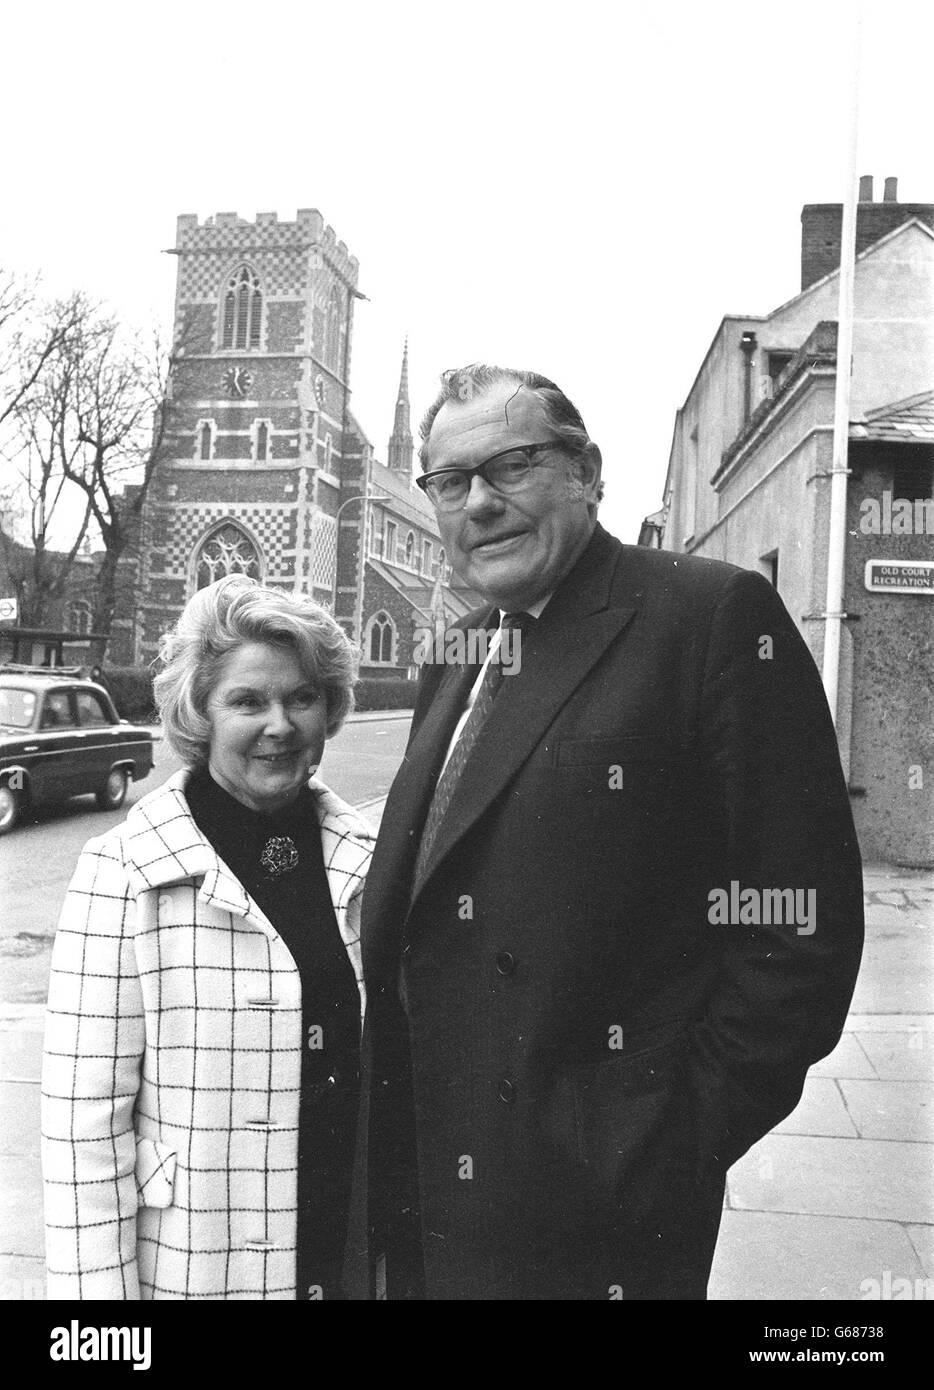 Mr Reginald Maudling and his wife Beryl, pictured outside the council offices, Chipping Barnet, where Mr Maudling addressed his adoption meeting as Conservative candidate. Mr Maudling, a former chancellor and Home Secretary, has been Barnet's MP for 25 years. Stock Photo